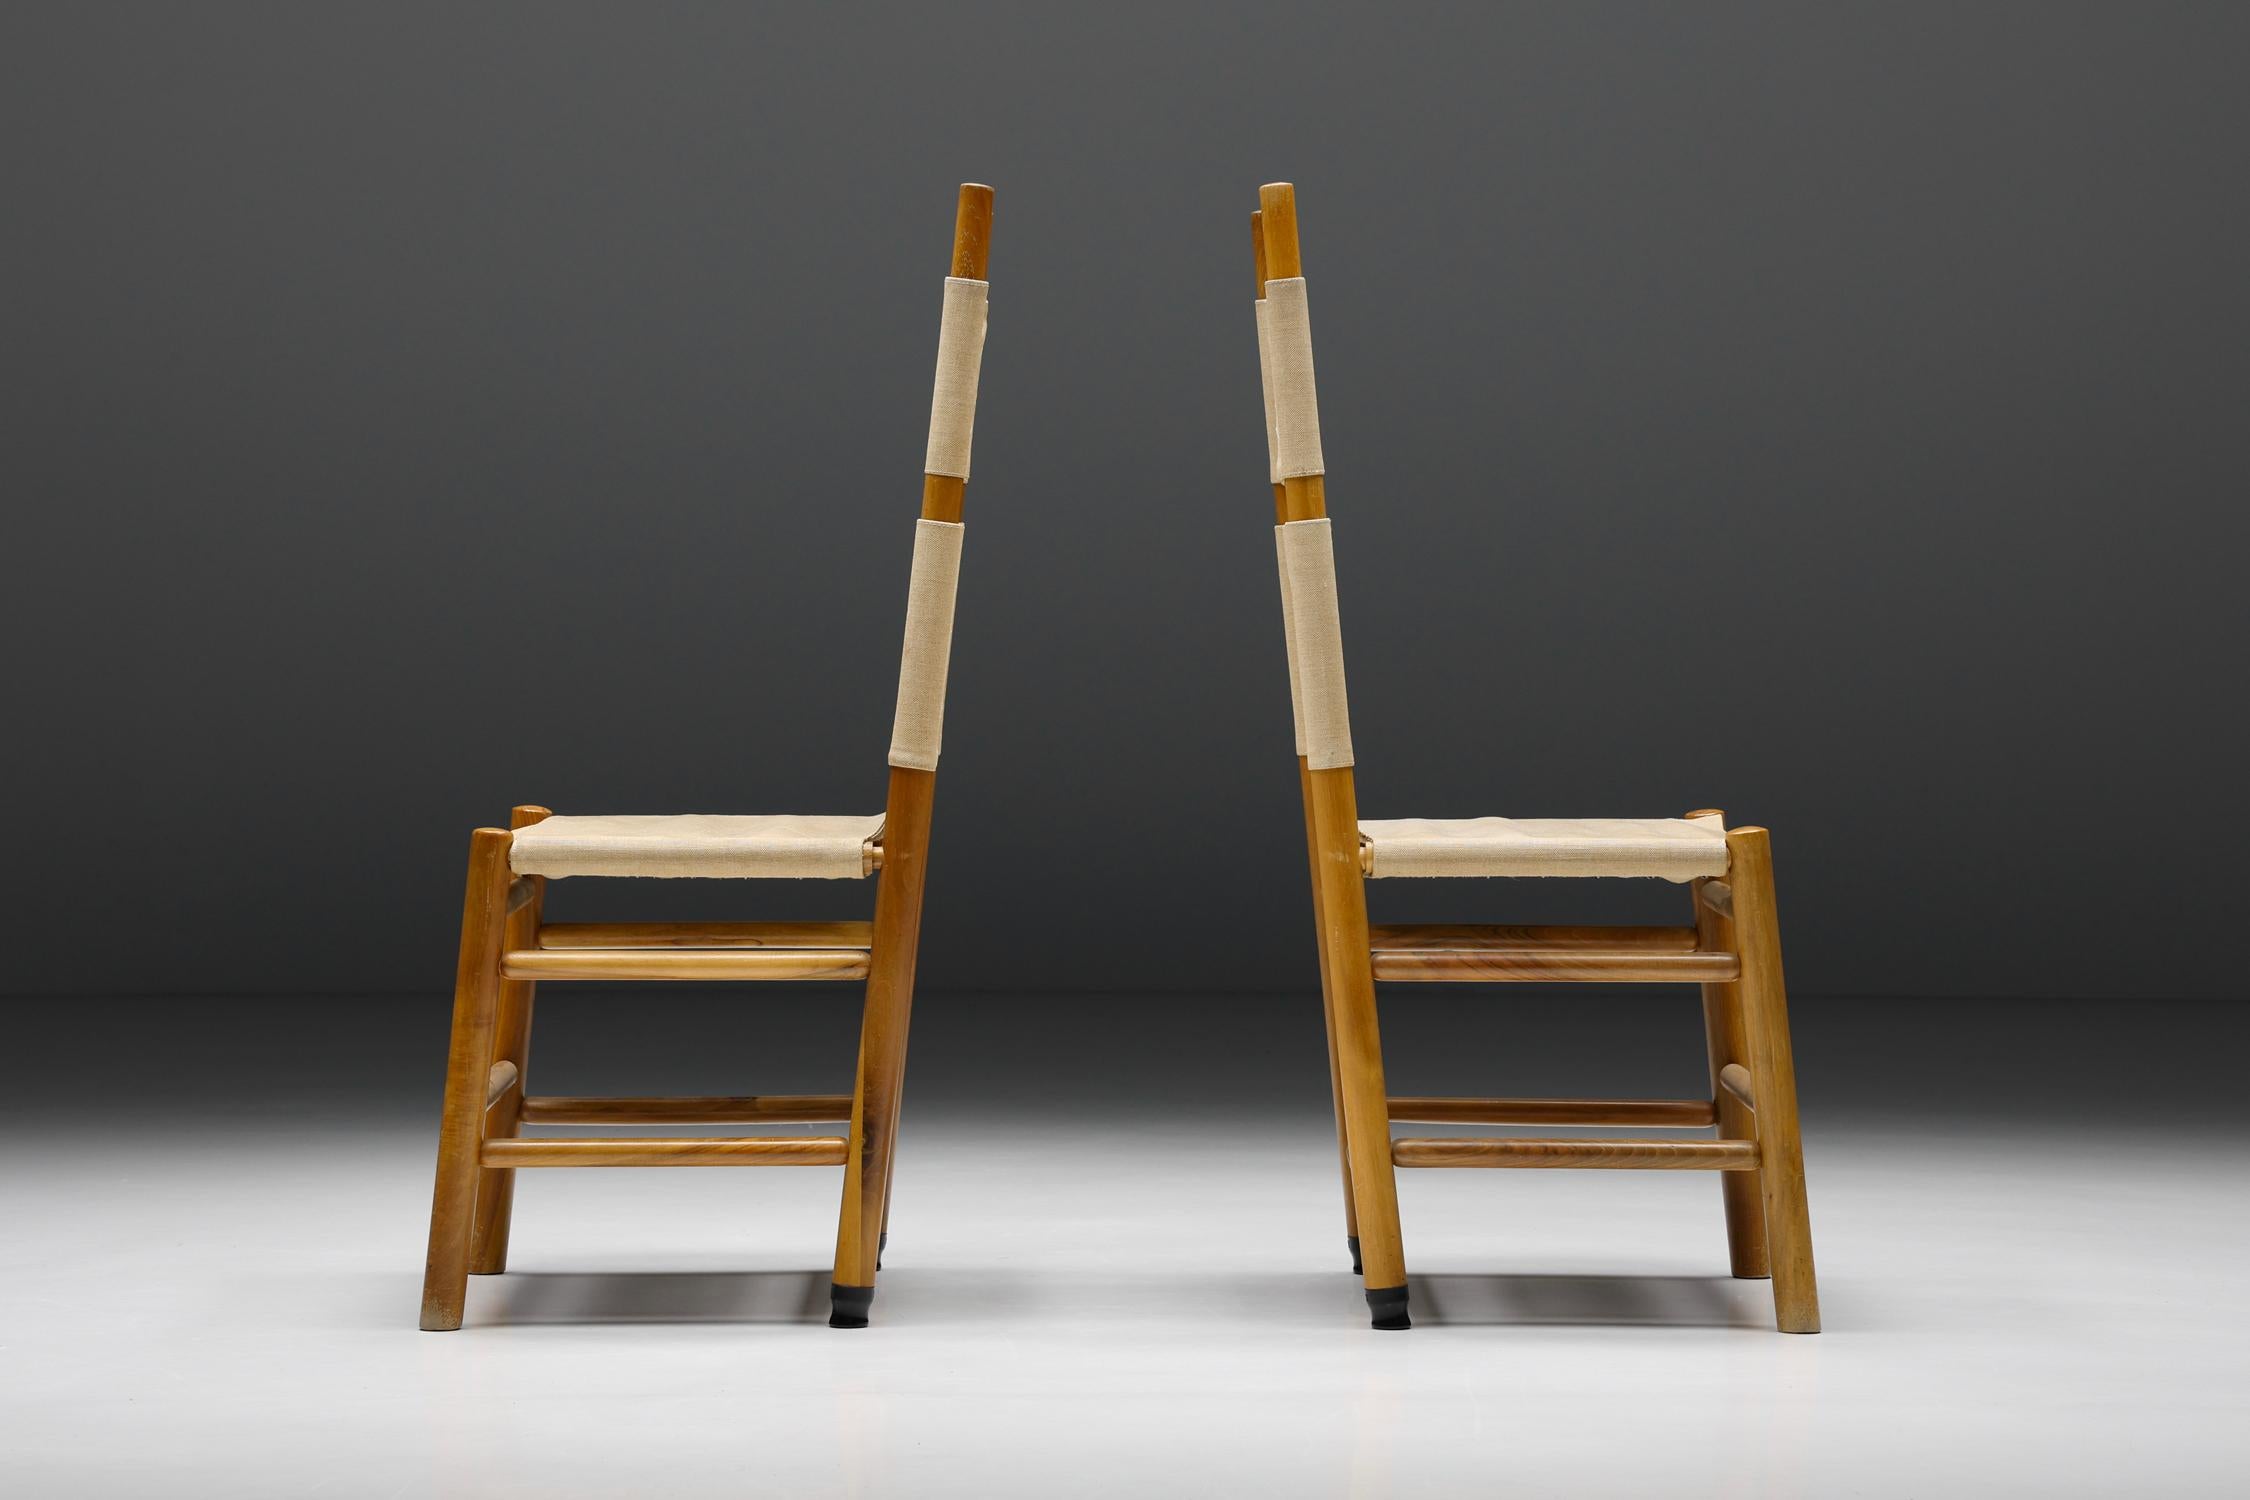 Scarpa; Afra & Tobia Scarpa; dining chairs; mid-century; Italian Modern; Italian Design; Italy, 1970s; Wood; Fabric;

With their rectangular frames and the two-piece fabric backrest, this set of dining chairs by Afra & Tobia Scarpa shows the true